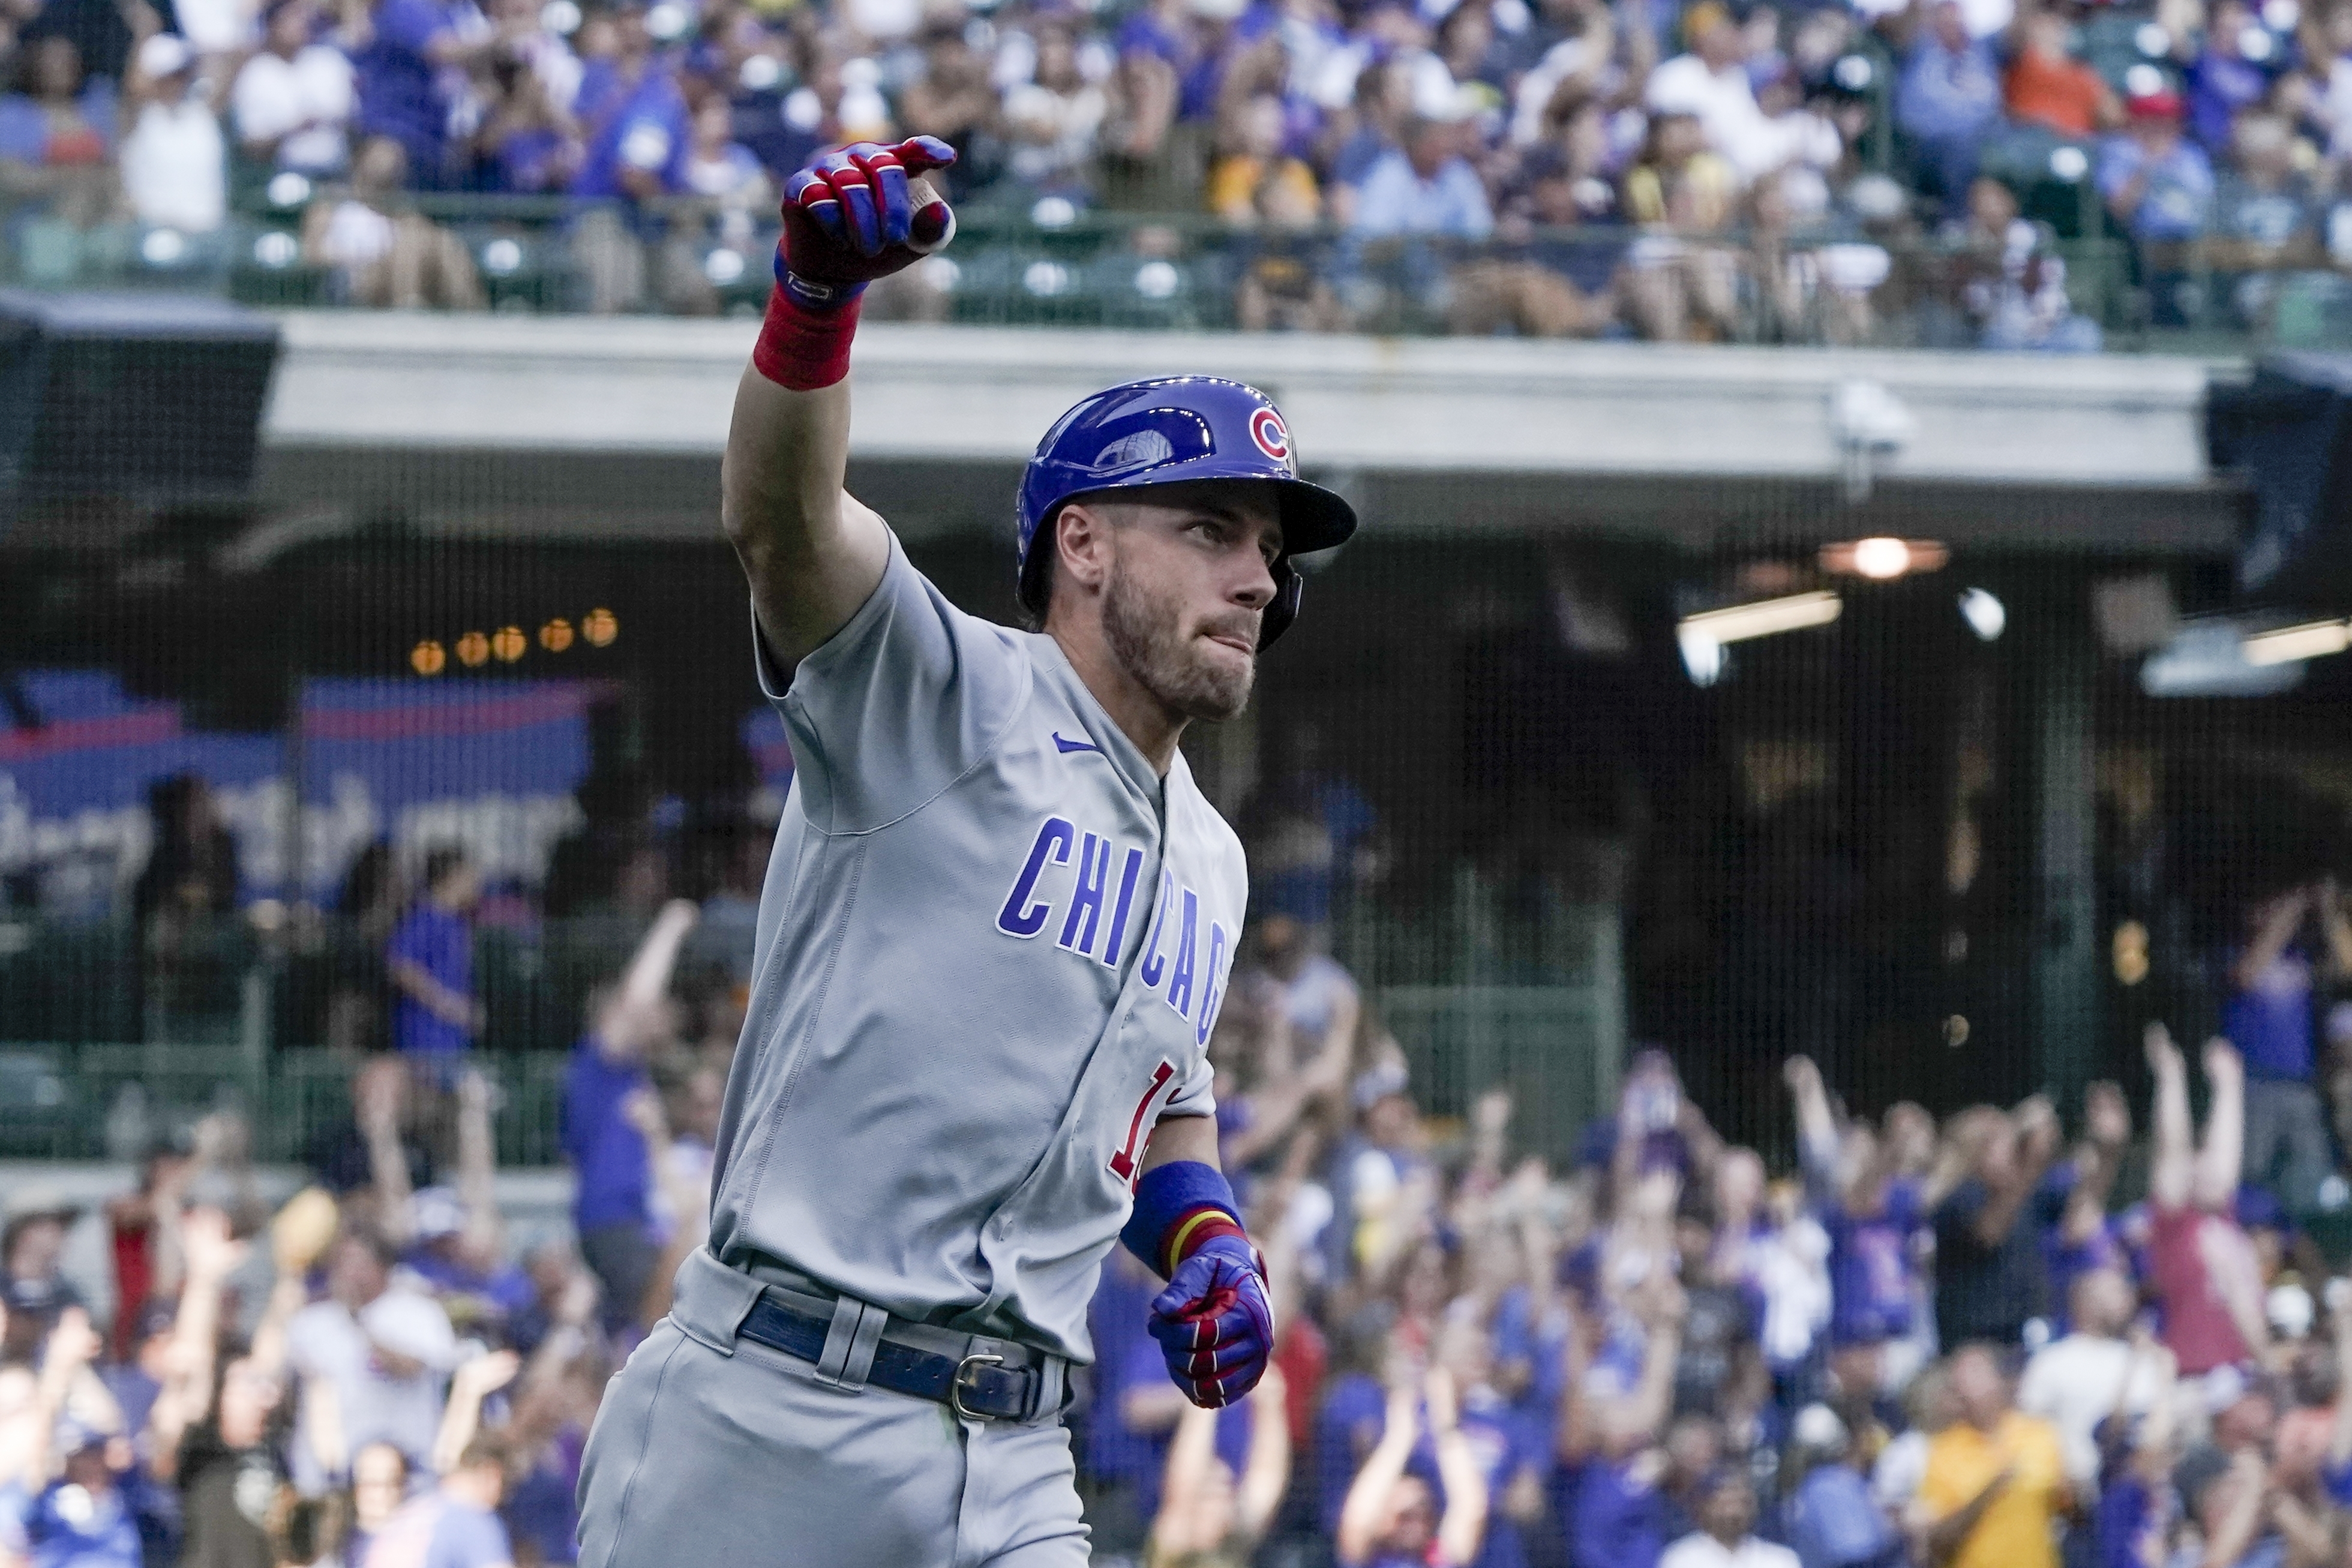 Patrick Wisdom sets Chicago Cubs rookie home run record